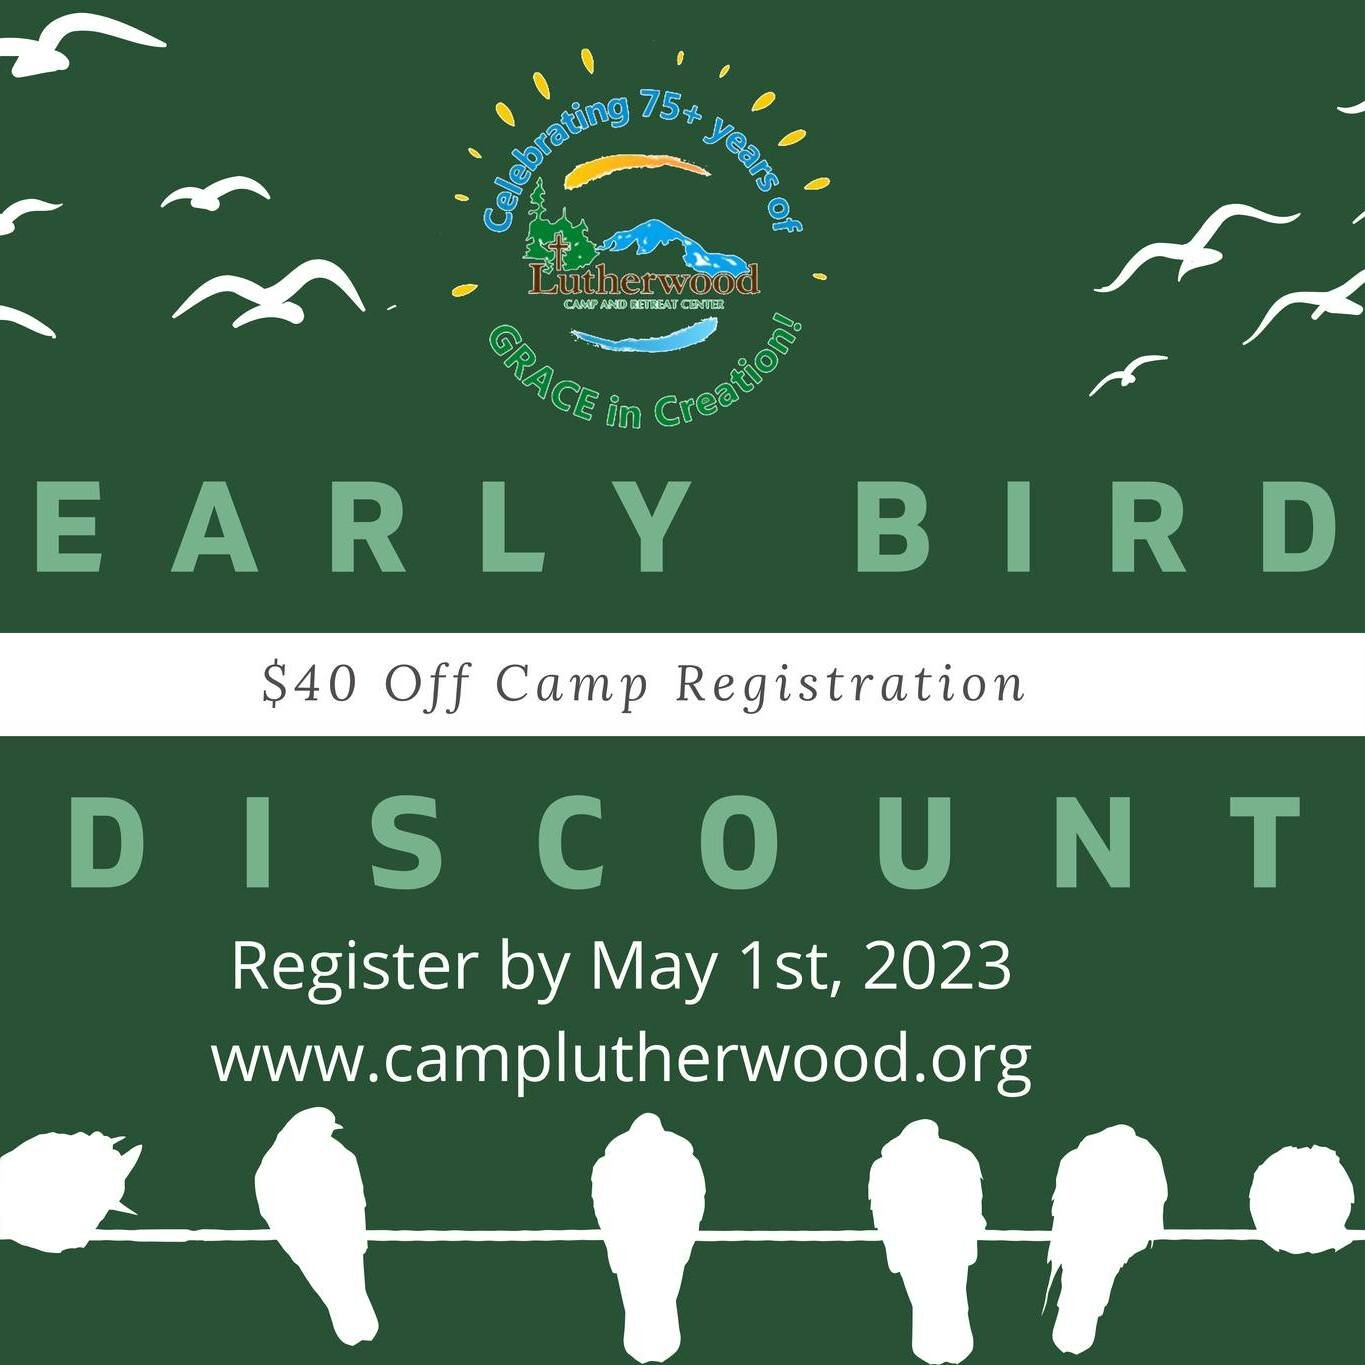 Register for summer camp now and take advantage of one of our promotional discounts to save money on camp this year! Learn more at https://www.camplutherwood.org/summercamp #summercamp2023 #summer #summercamp #washingtonstate #pnw #washington #luther